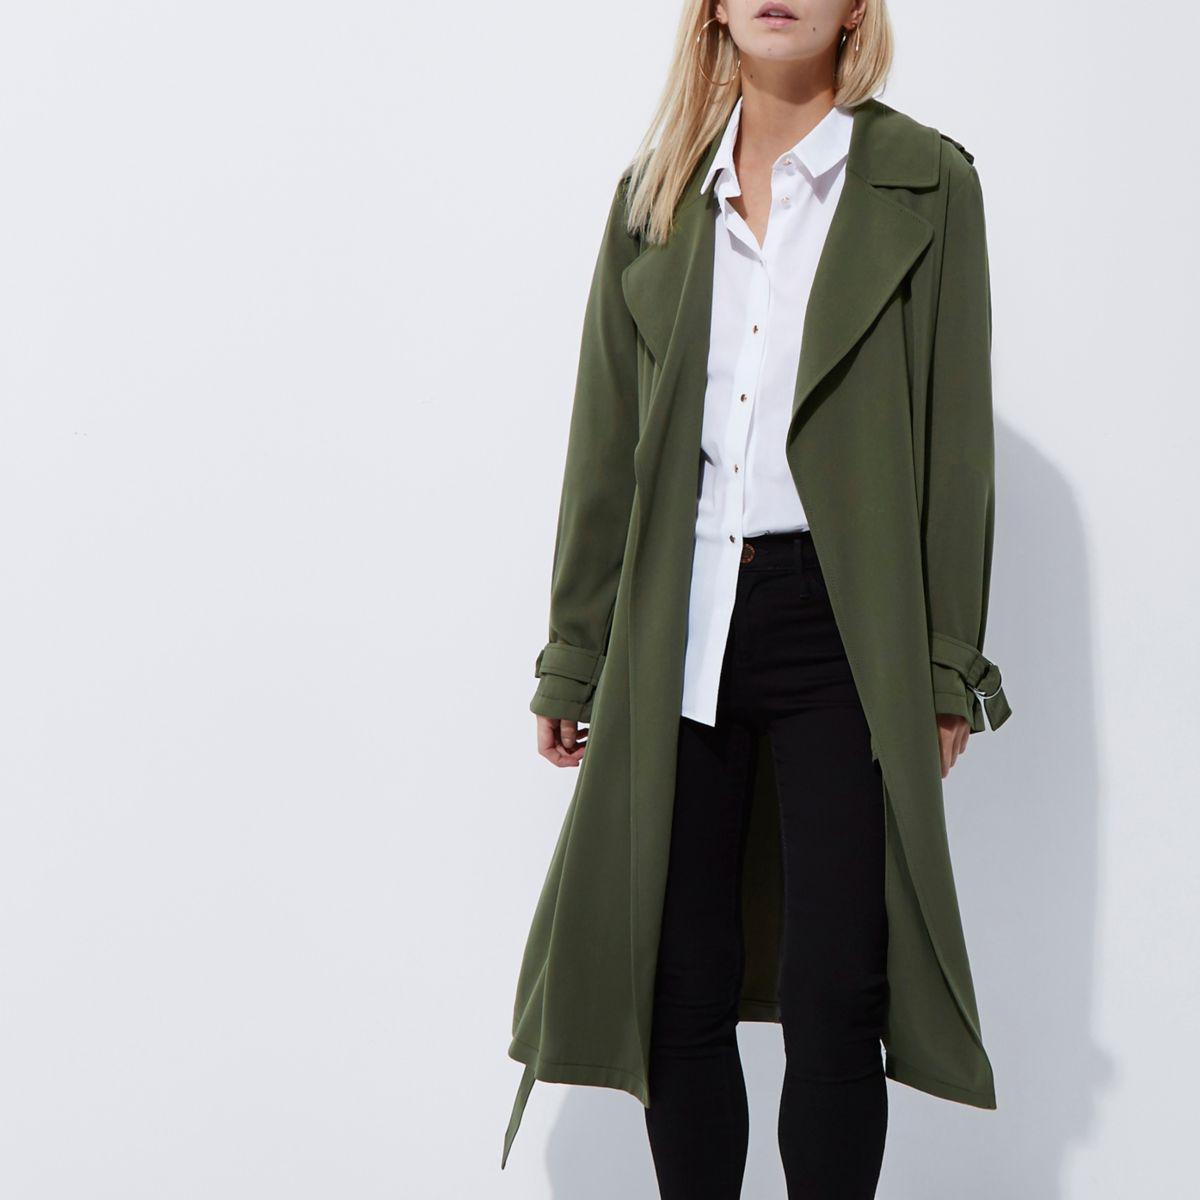 River Island Synthetic Petite Khaki Green Duster Trench Coat - Lyst